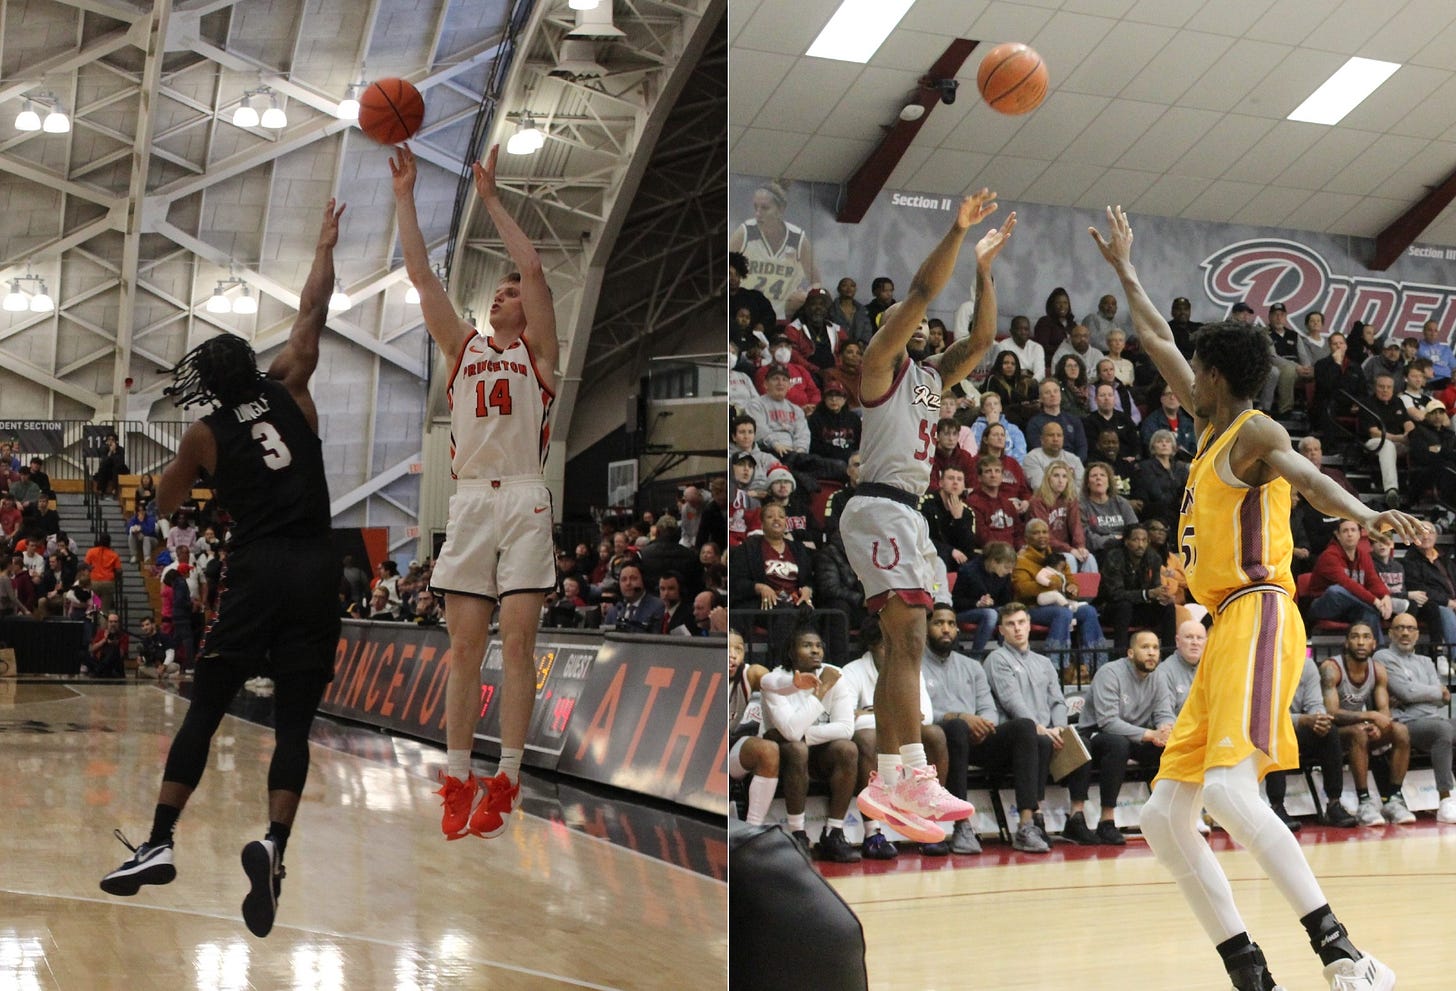 Princeton’s Matt Allocco (left, #14) and Rider’s Dwight Murray Jr. (right, #55) are leading red-hot teams into conference tournament week. (Photos by Adam Zielonka)